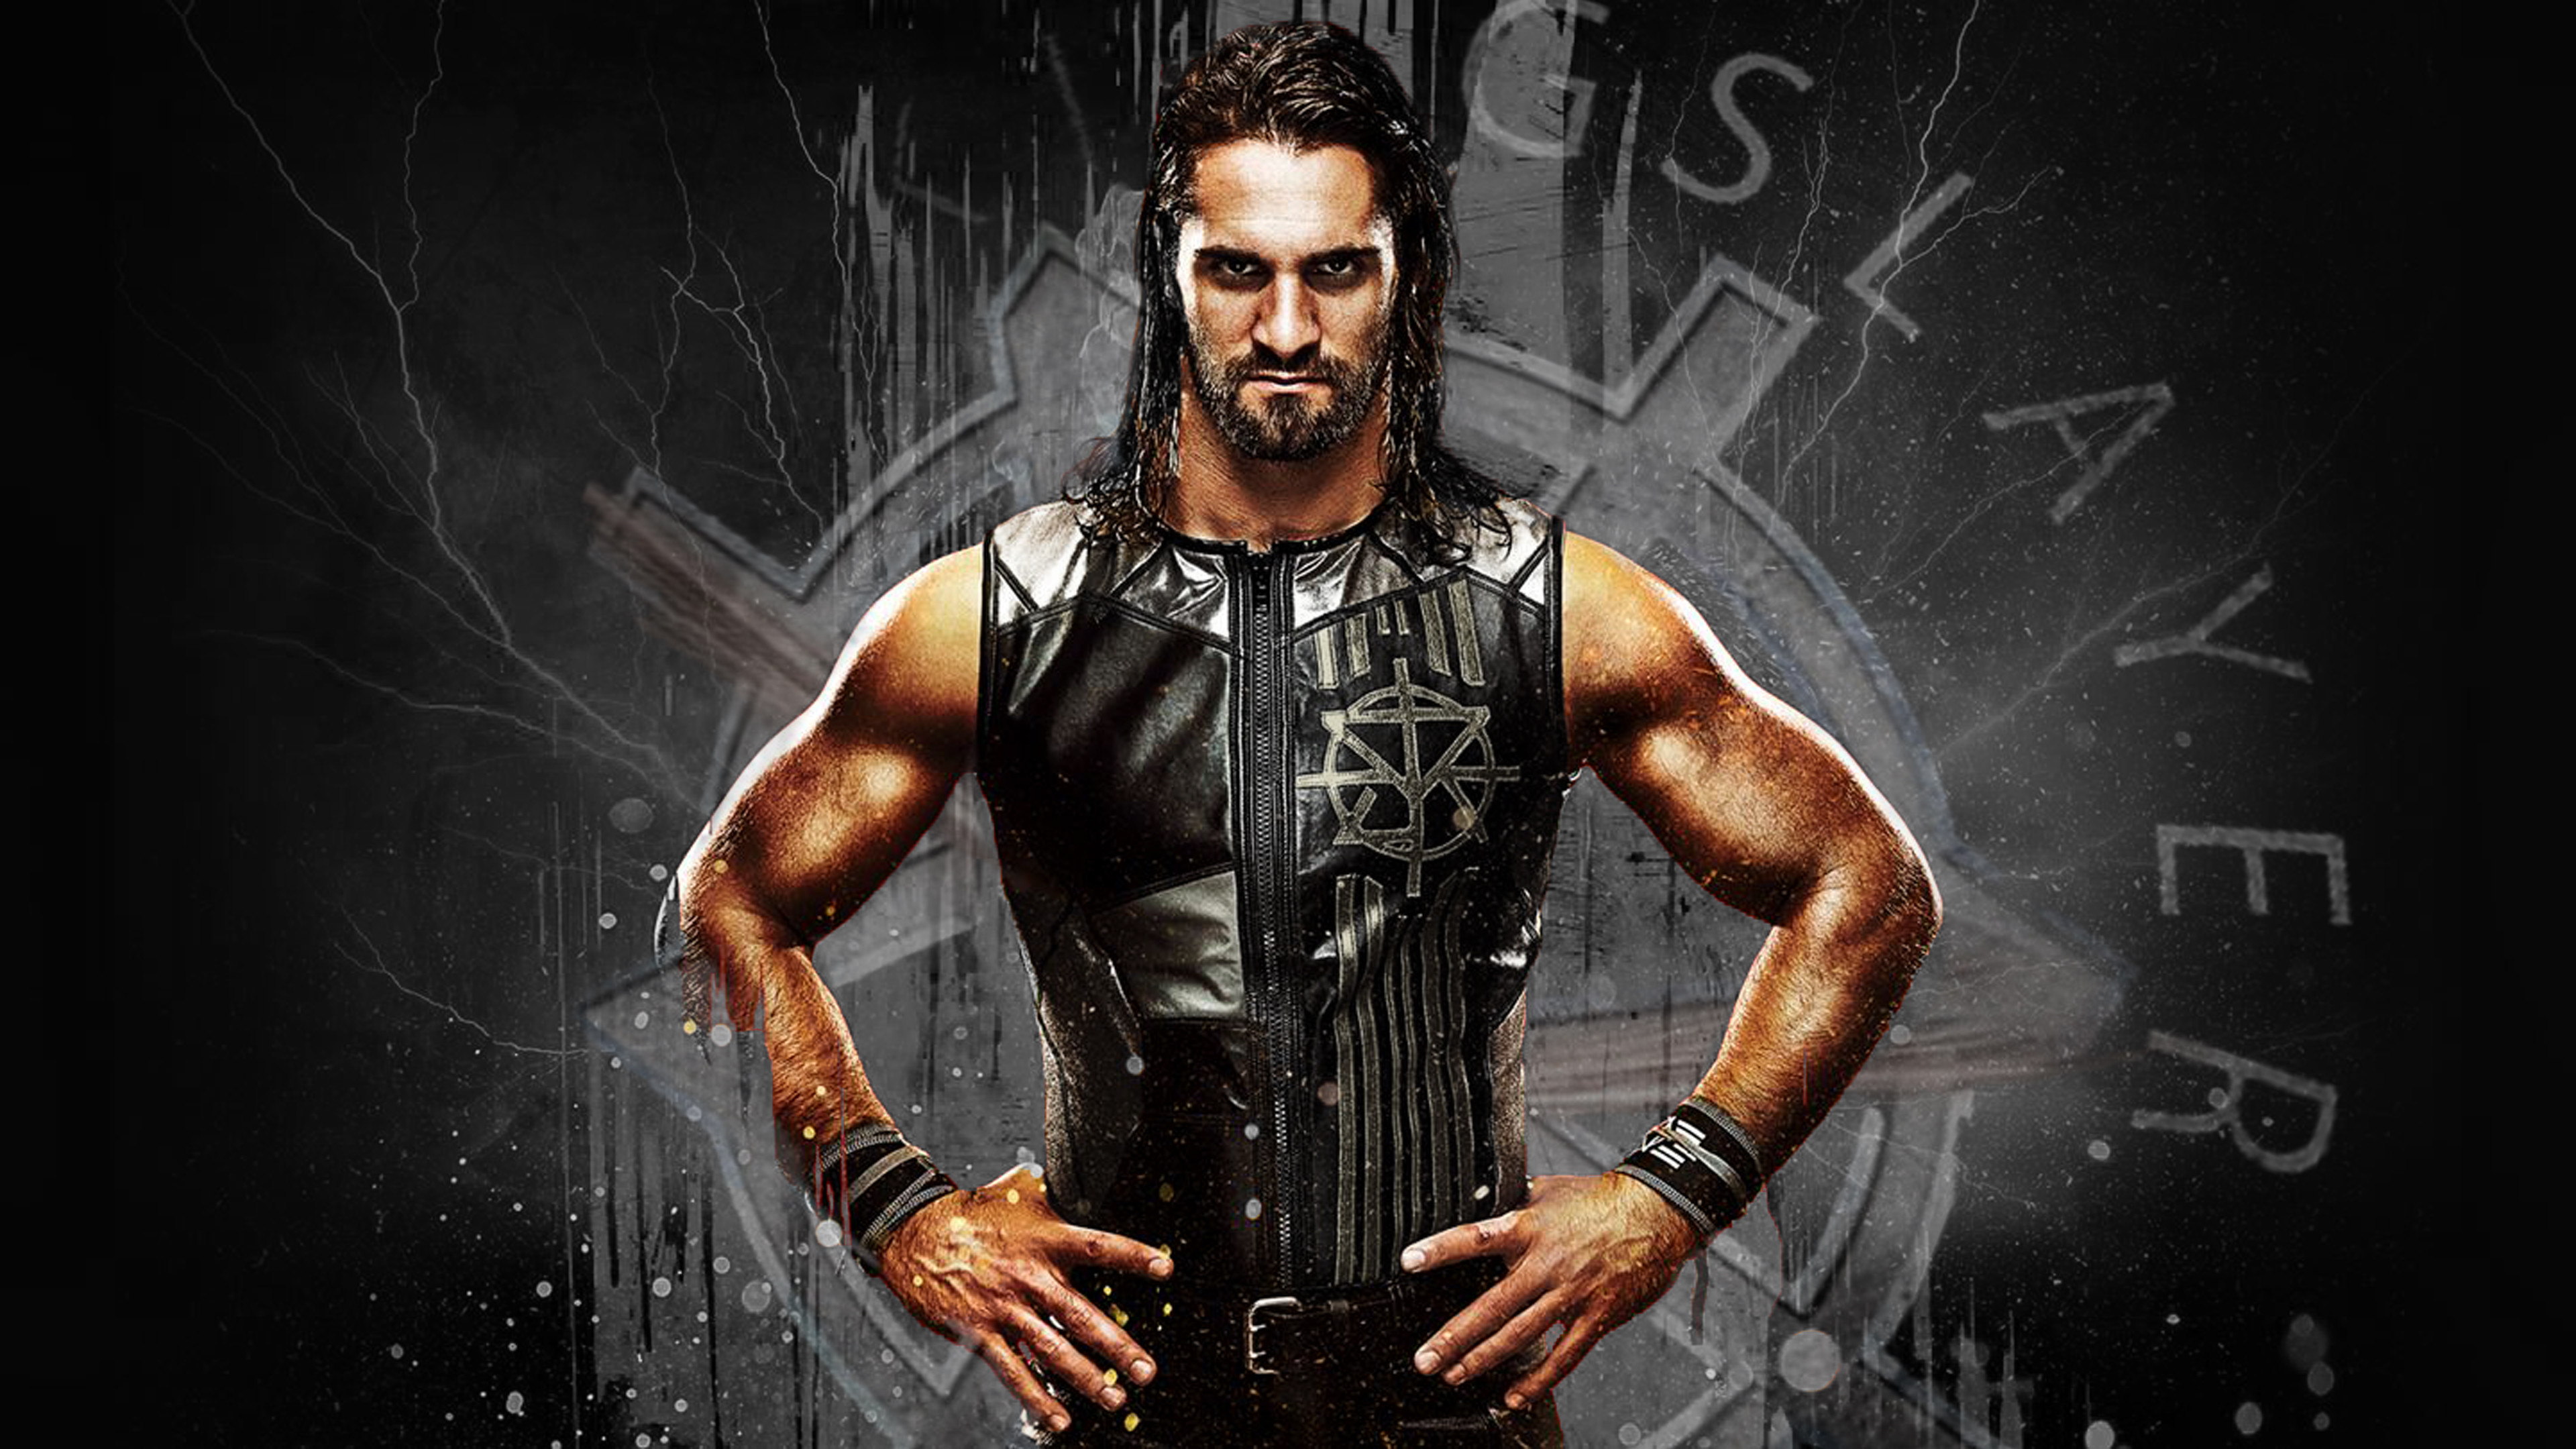 The Kingslayer Seth Rollins By Tynick98 The Kingslayer Seth Rollins By Tynick98 3840x2160